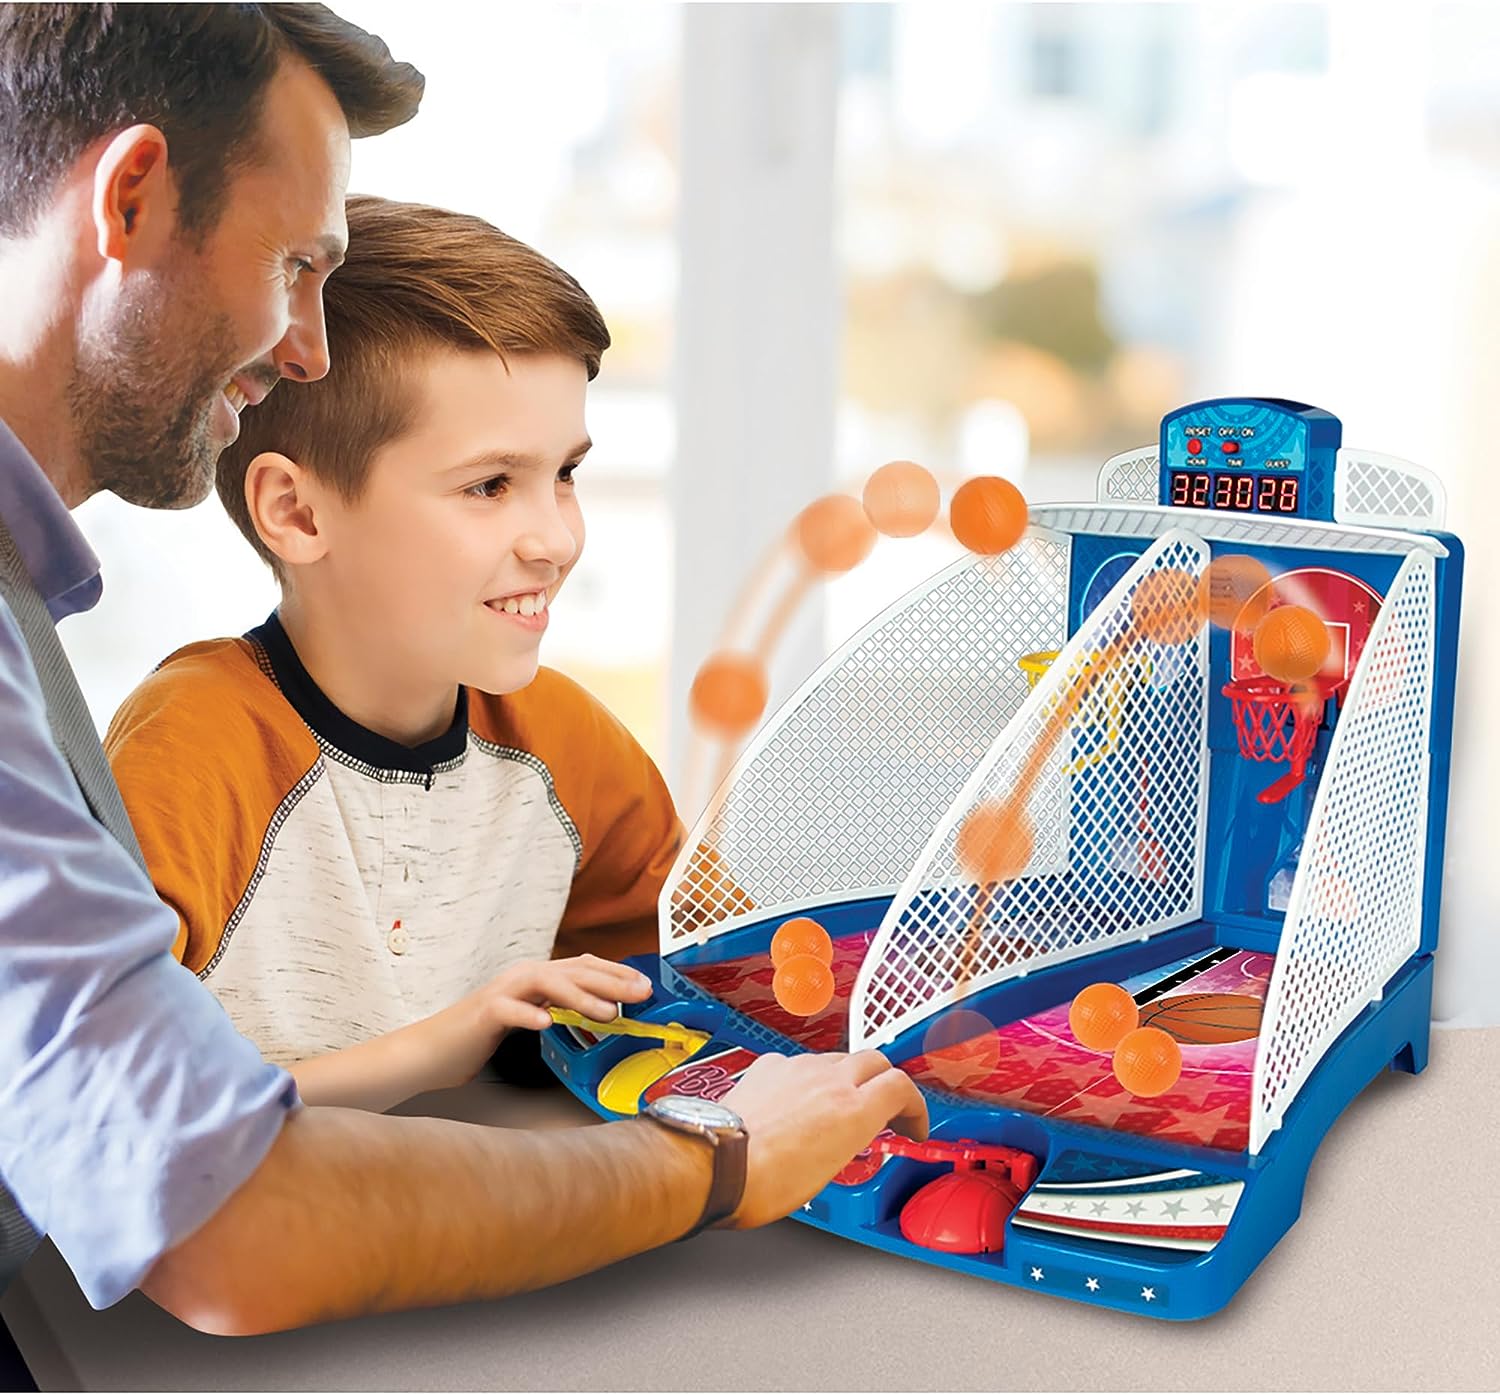 Retro Arcade Electronic: Basketball -Tabletop Game, Electric Scoreboard, Sound Effects, 2 Players, Ages 6+